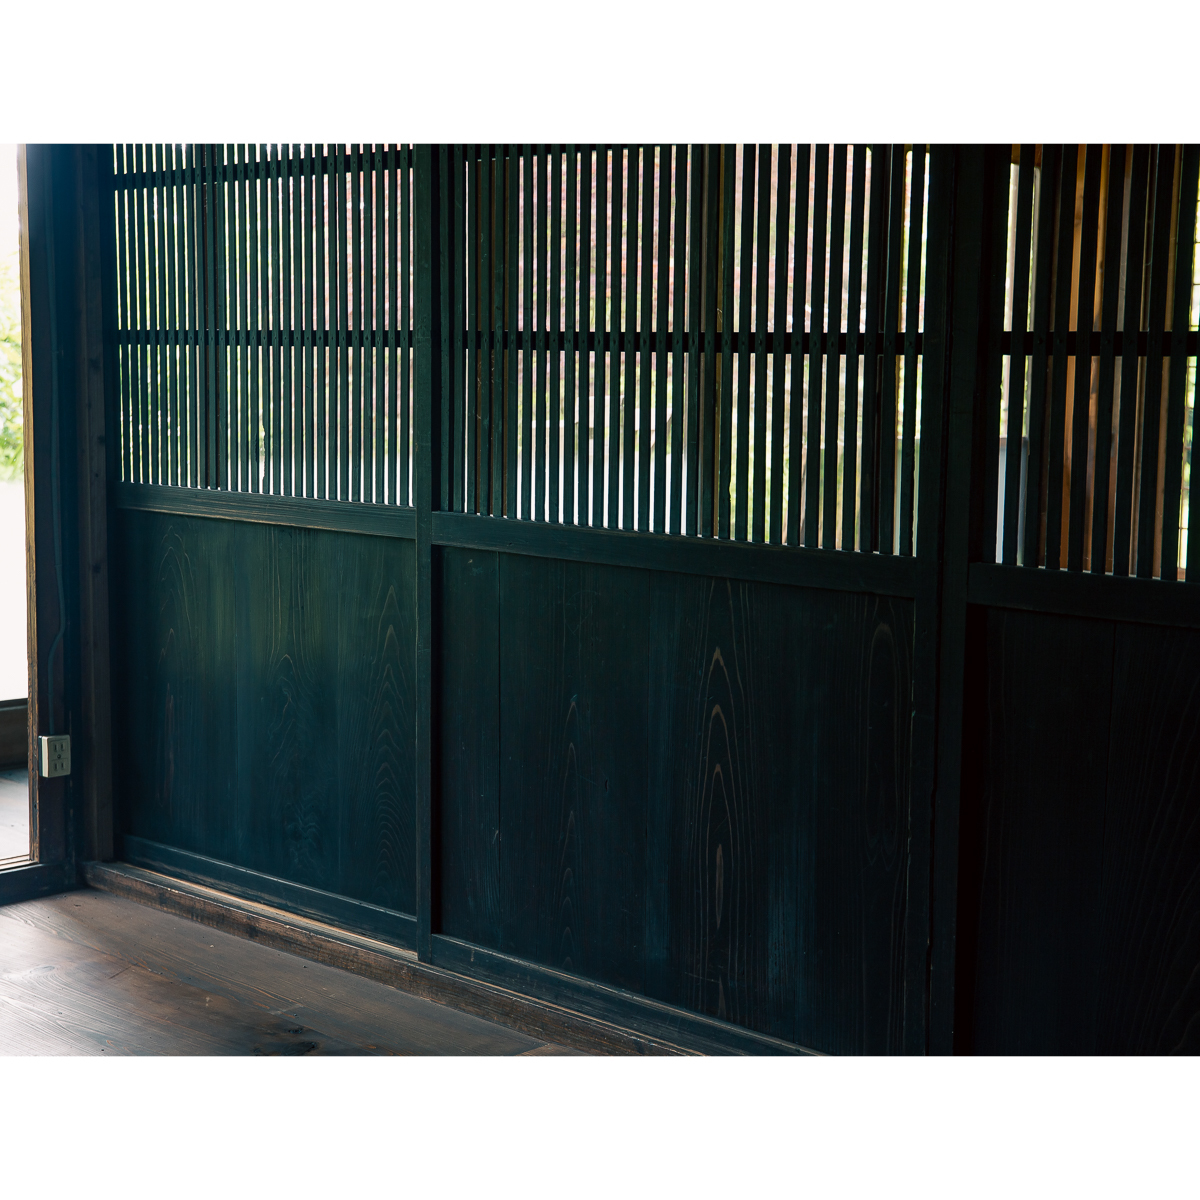 [ old Japanese-style house. fittings ] Taisho period. thousand classical . door 4 sheets / width 930 height 1765 thickness 32/. door sliding door wooden door wooden fittings old fittings / store interior old Japanese-style house modified equipment reform DIY